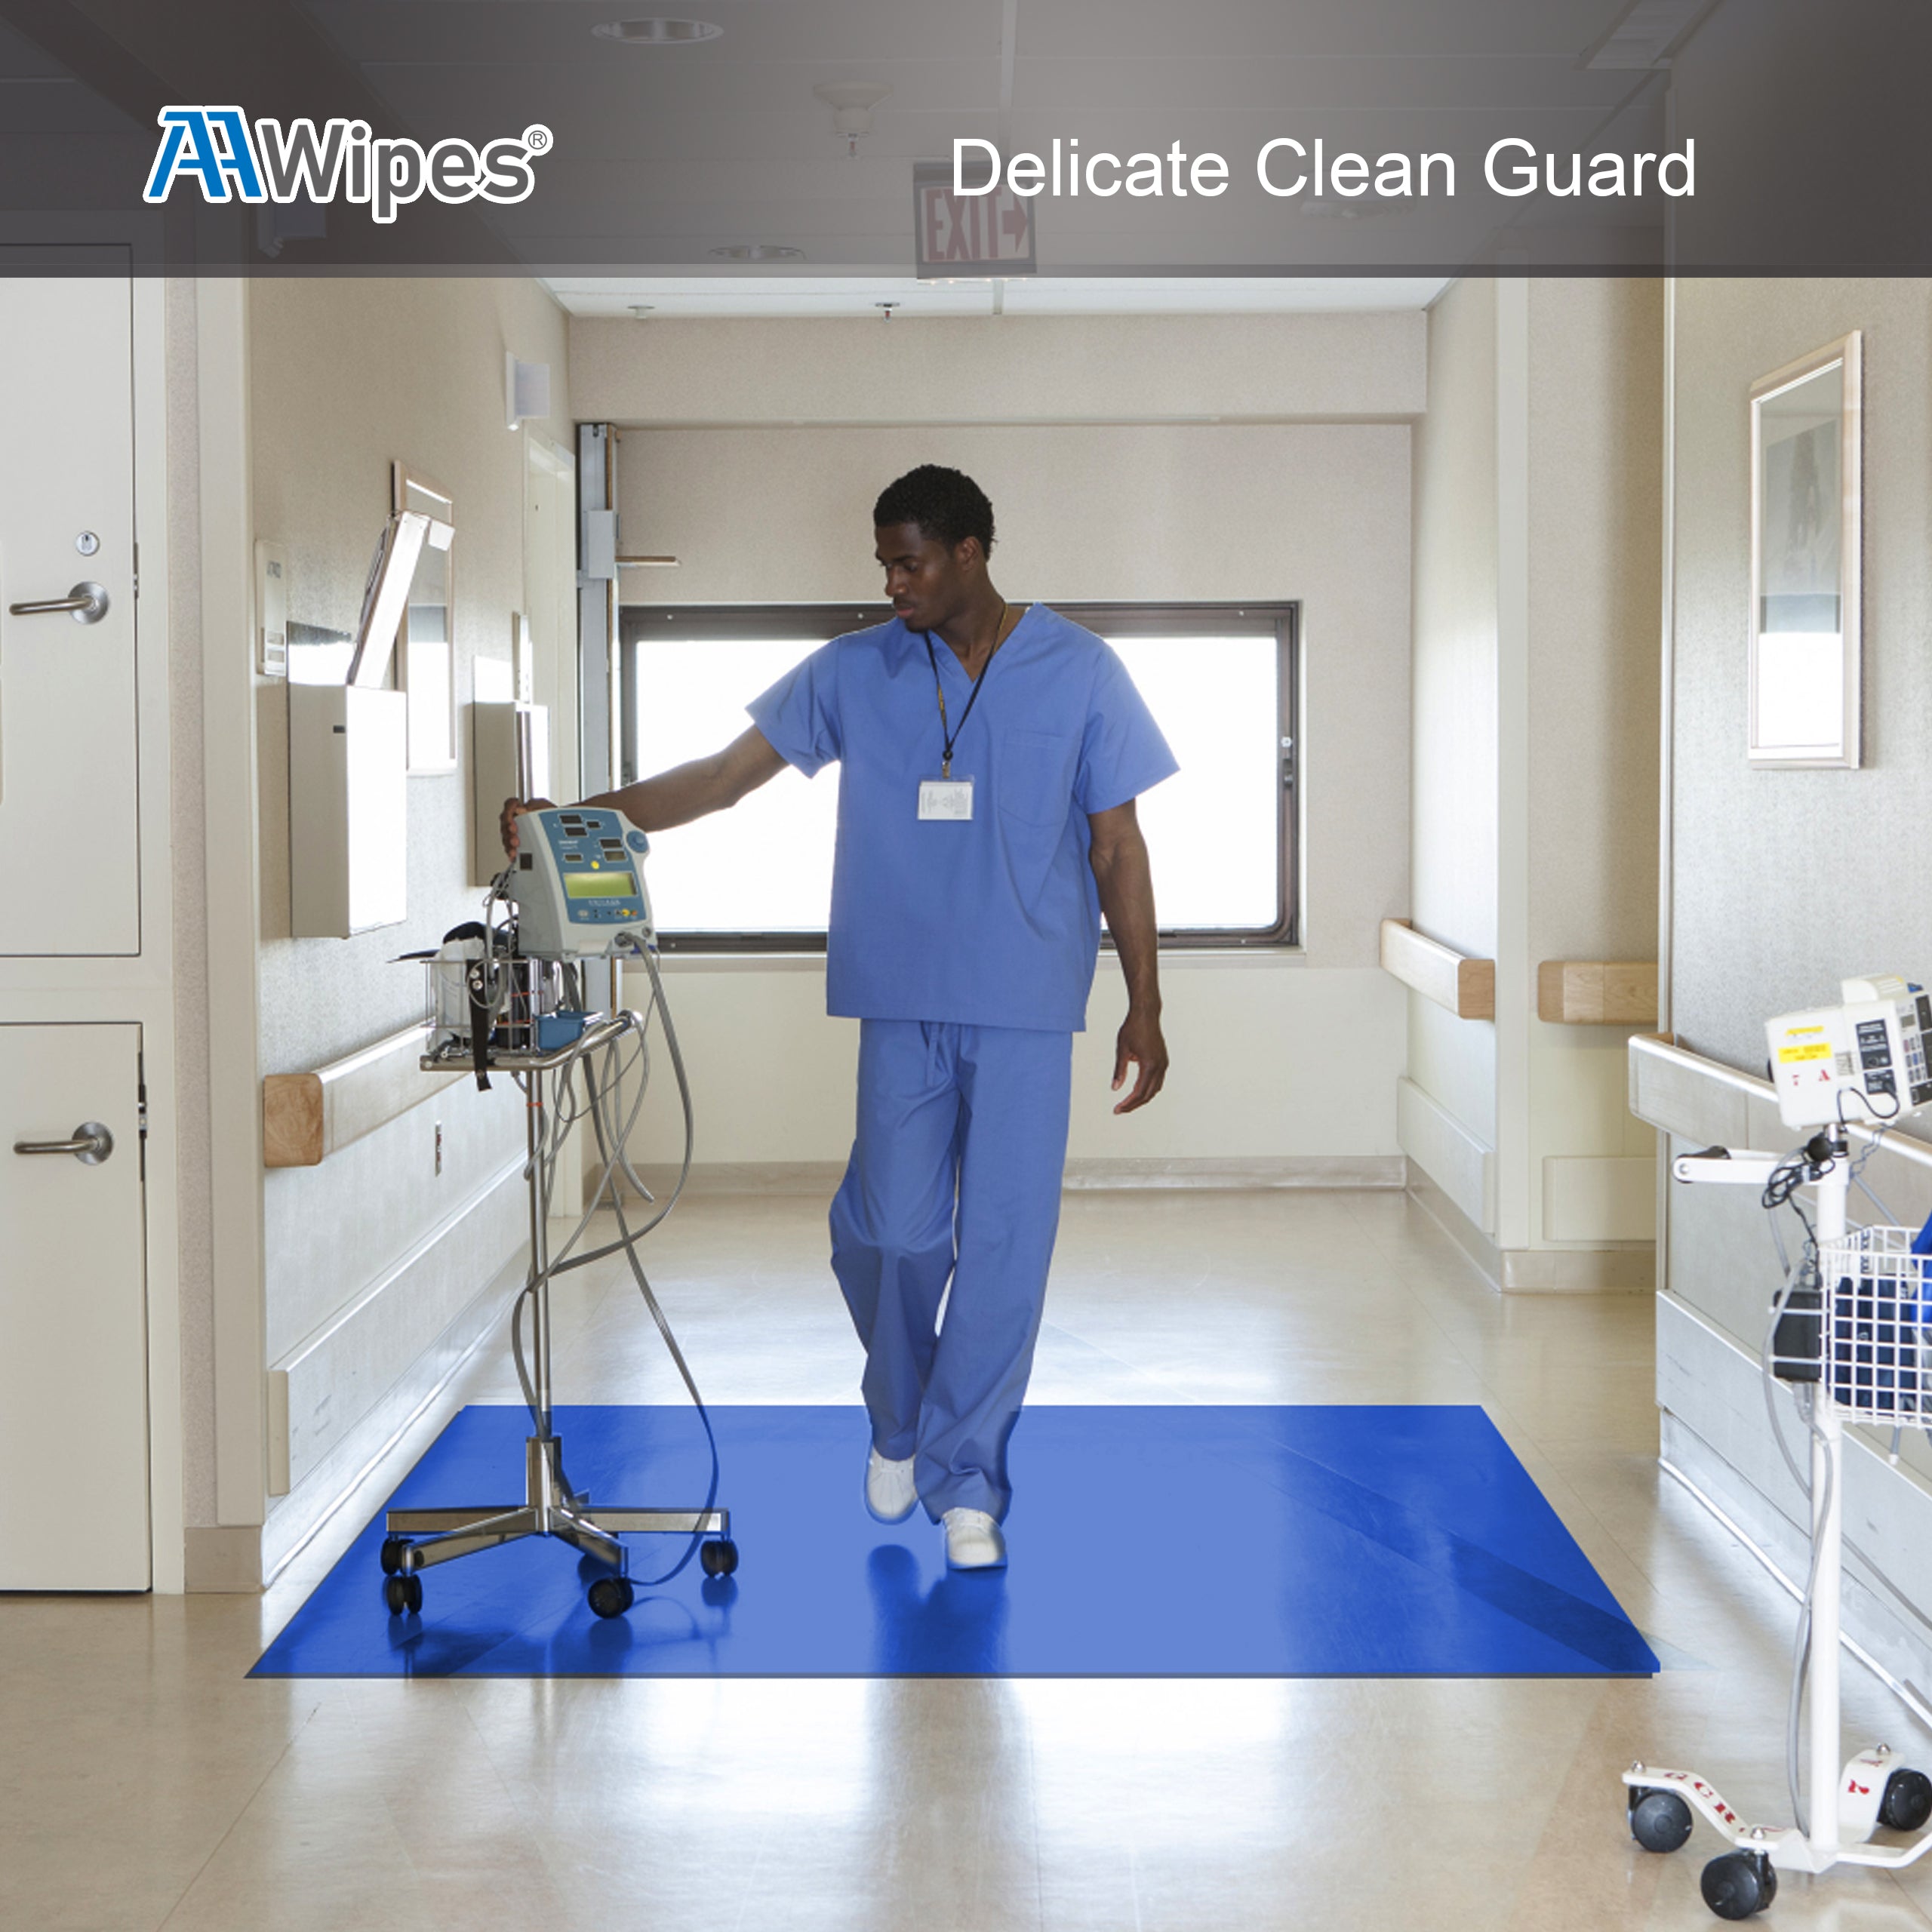 Cleanroom Sticky Floor Mats 18"X36" Blue for Pharmaceuticals,Food Processing, Hospital, Lab, Biotechnology, Automotive, Construction, Health Care, Manufacturing, Semiconductor  (6,000 Sheets/200 Mats/20 Boxs/Case) (No. IPSM-1836-300-B)